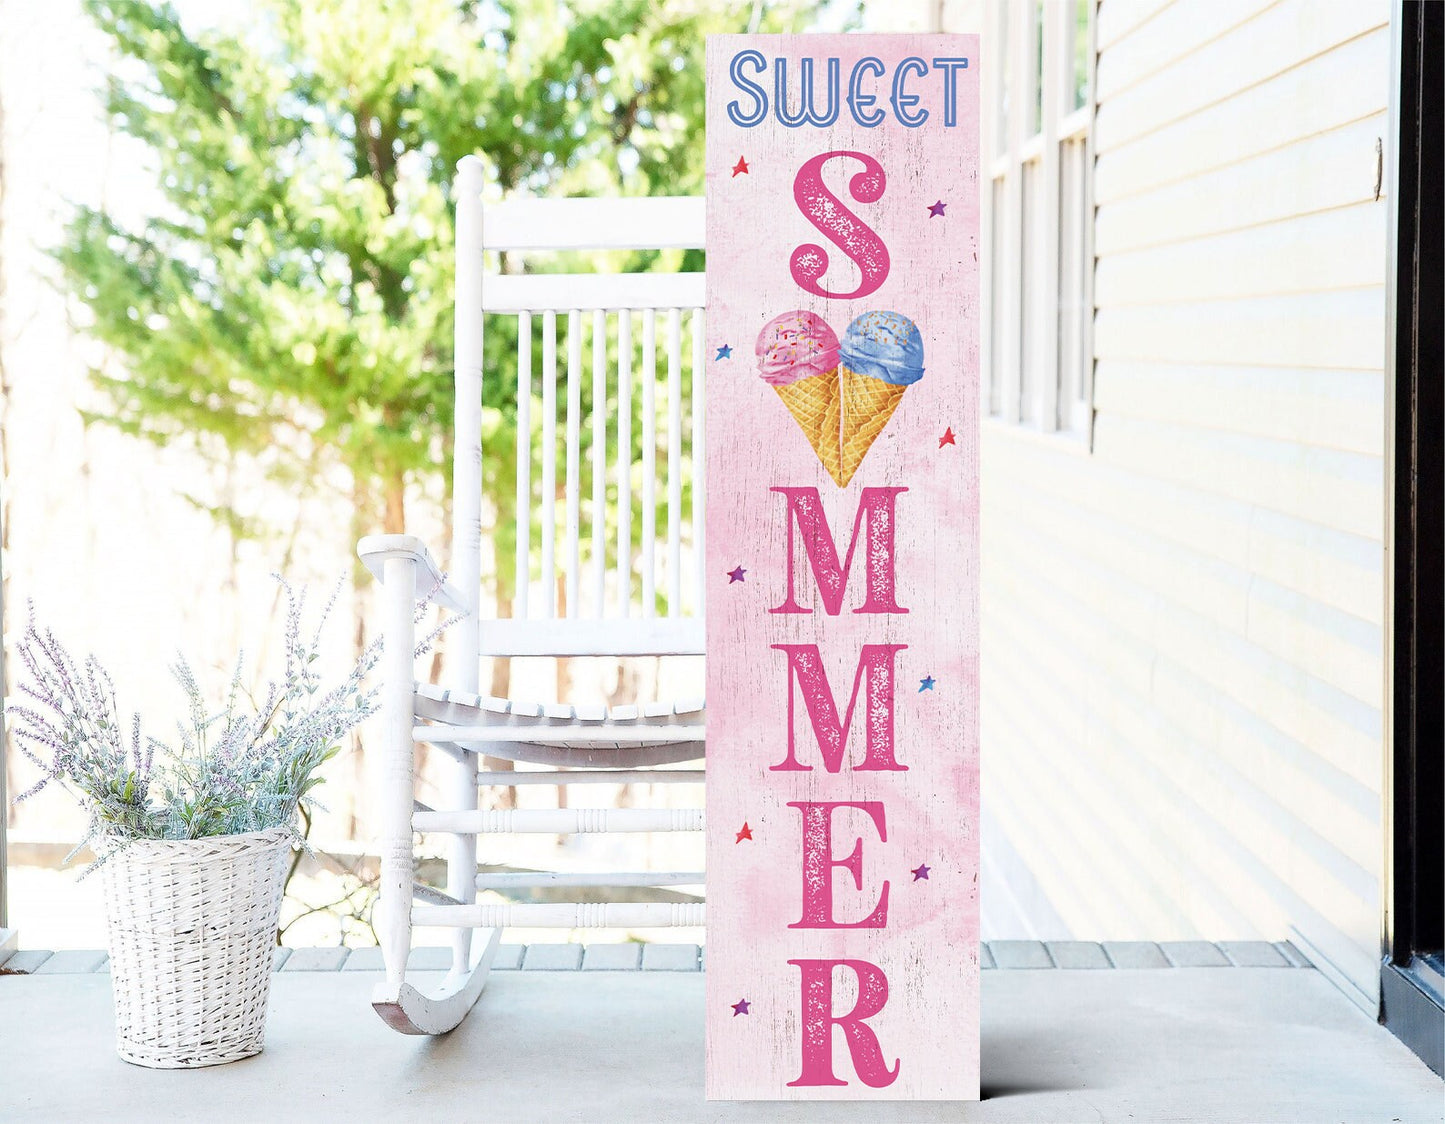 36in Sweet Summer Ice Cream Porch Sign - Wooden Front Door Wall Decor for Home - Fun & Colorful Seasonal Design